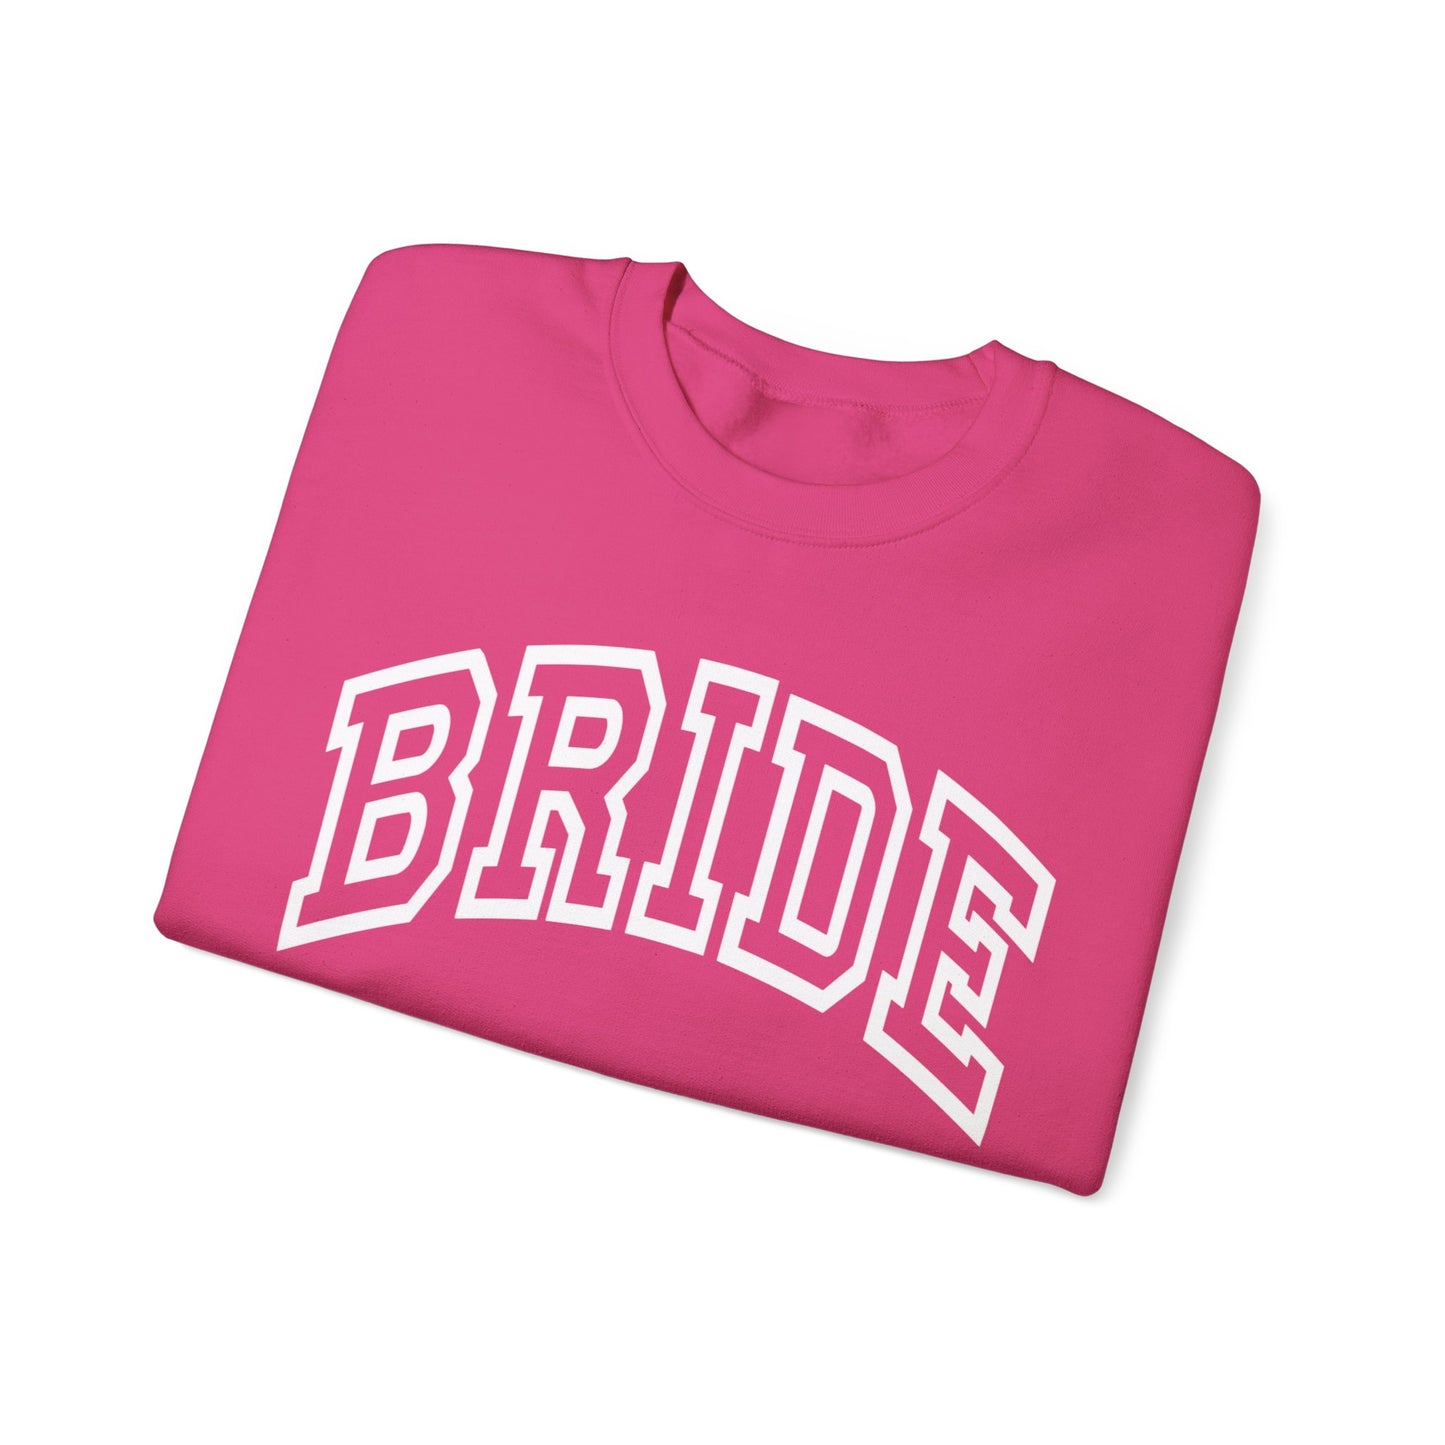 Bridal Bliss: Cozy 'BRIDE' Signature Sweatshirt for the Chic Bride-to-Be